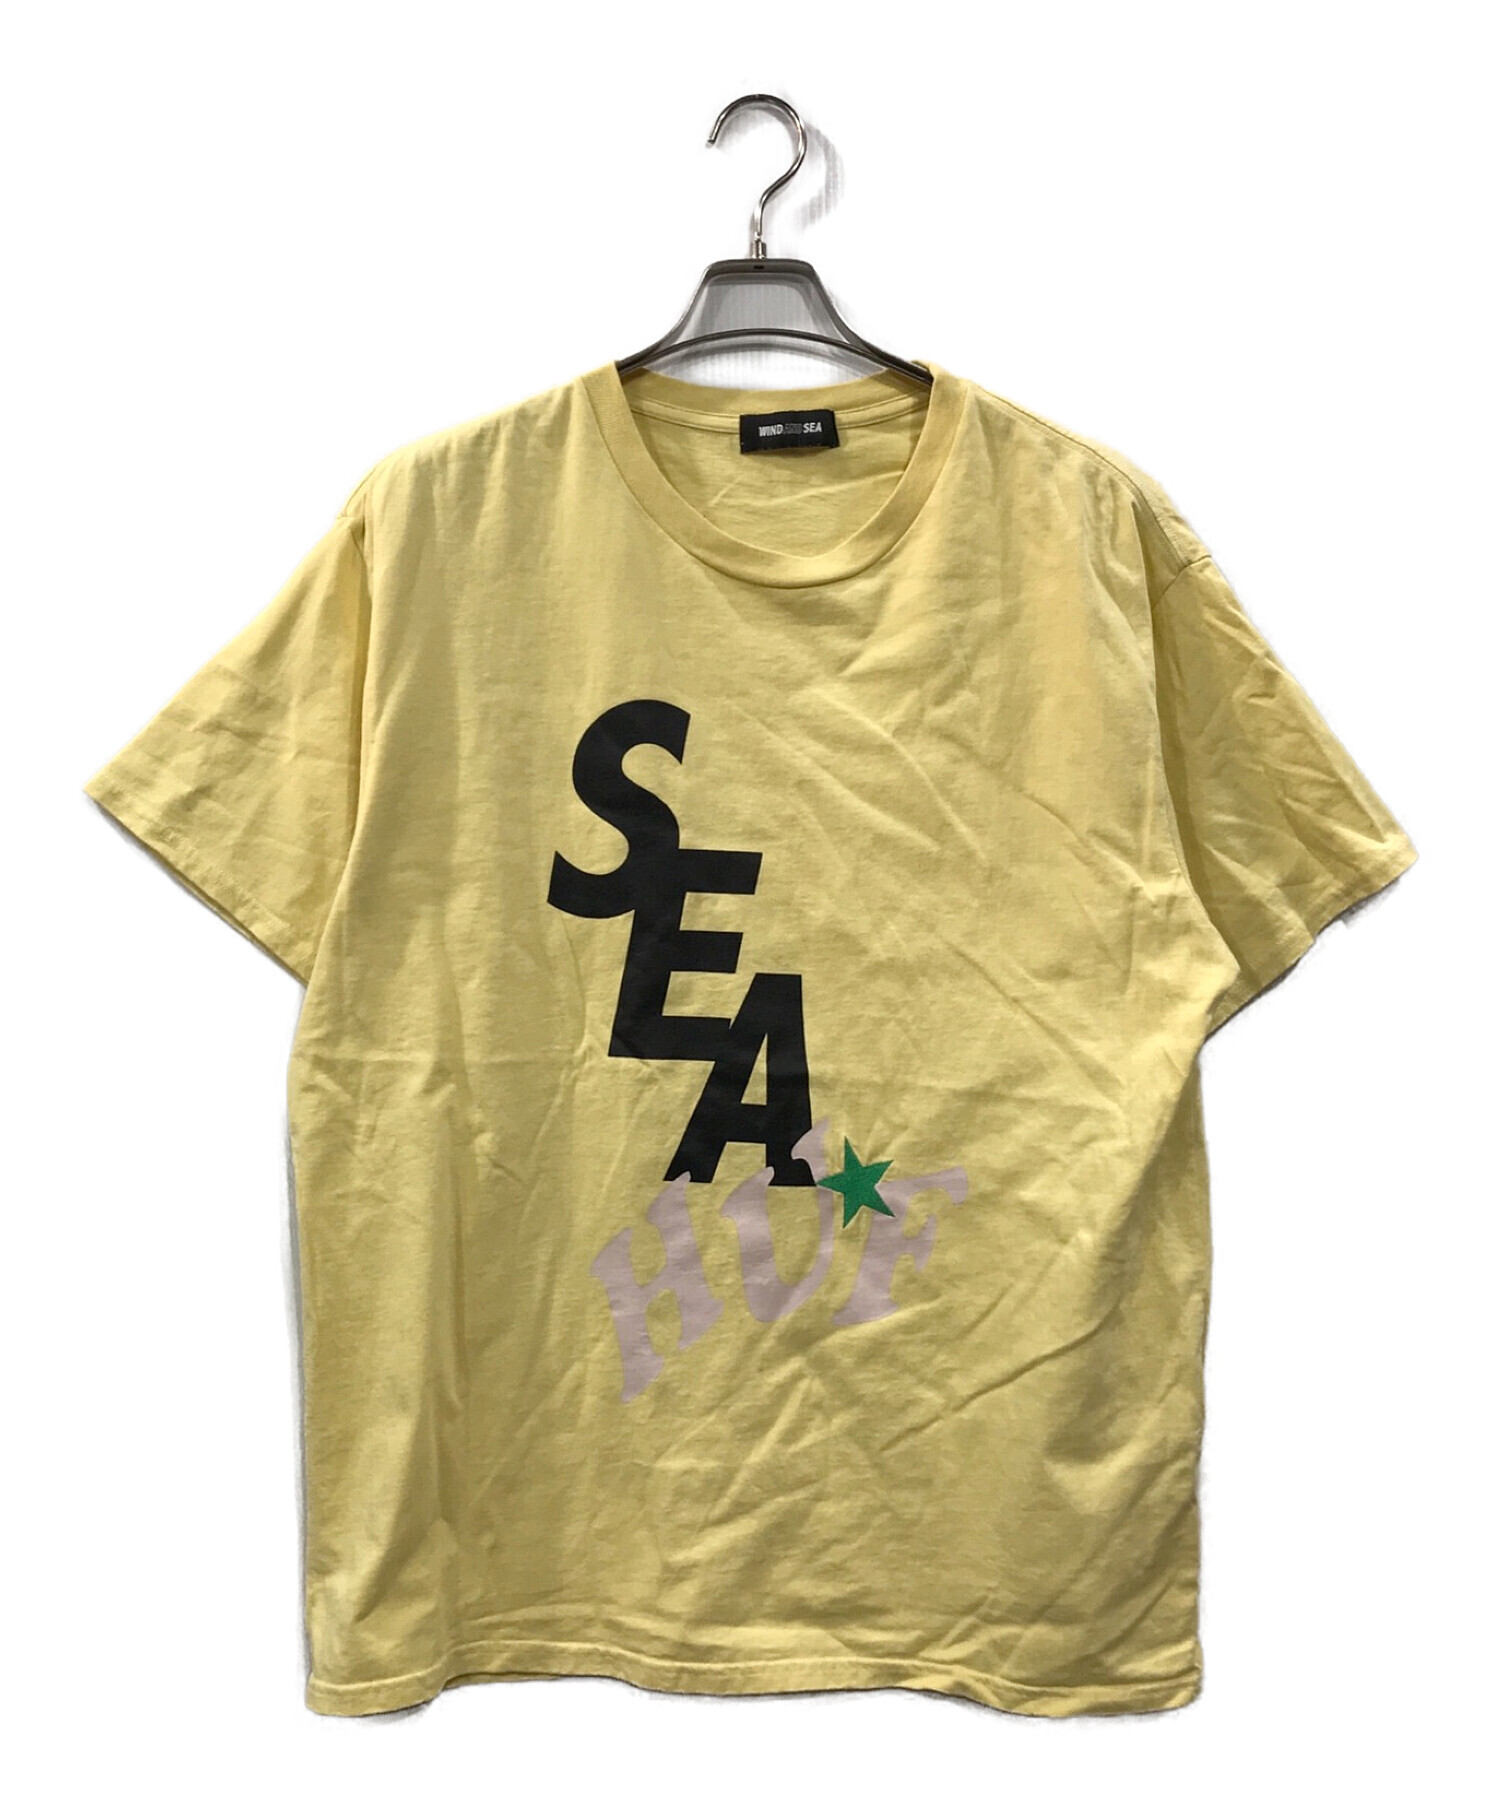 WIND AND SEA × HUF (ウィンダンシー×ハフ) HUF X WDS SOLID AND TIE DYE TEE イエロー サイズ:L